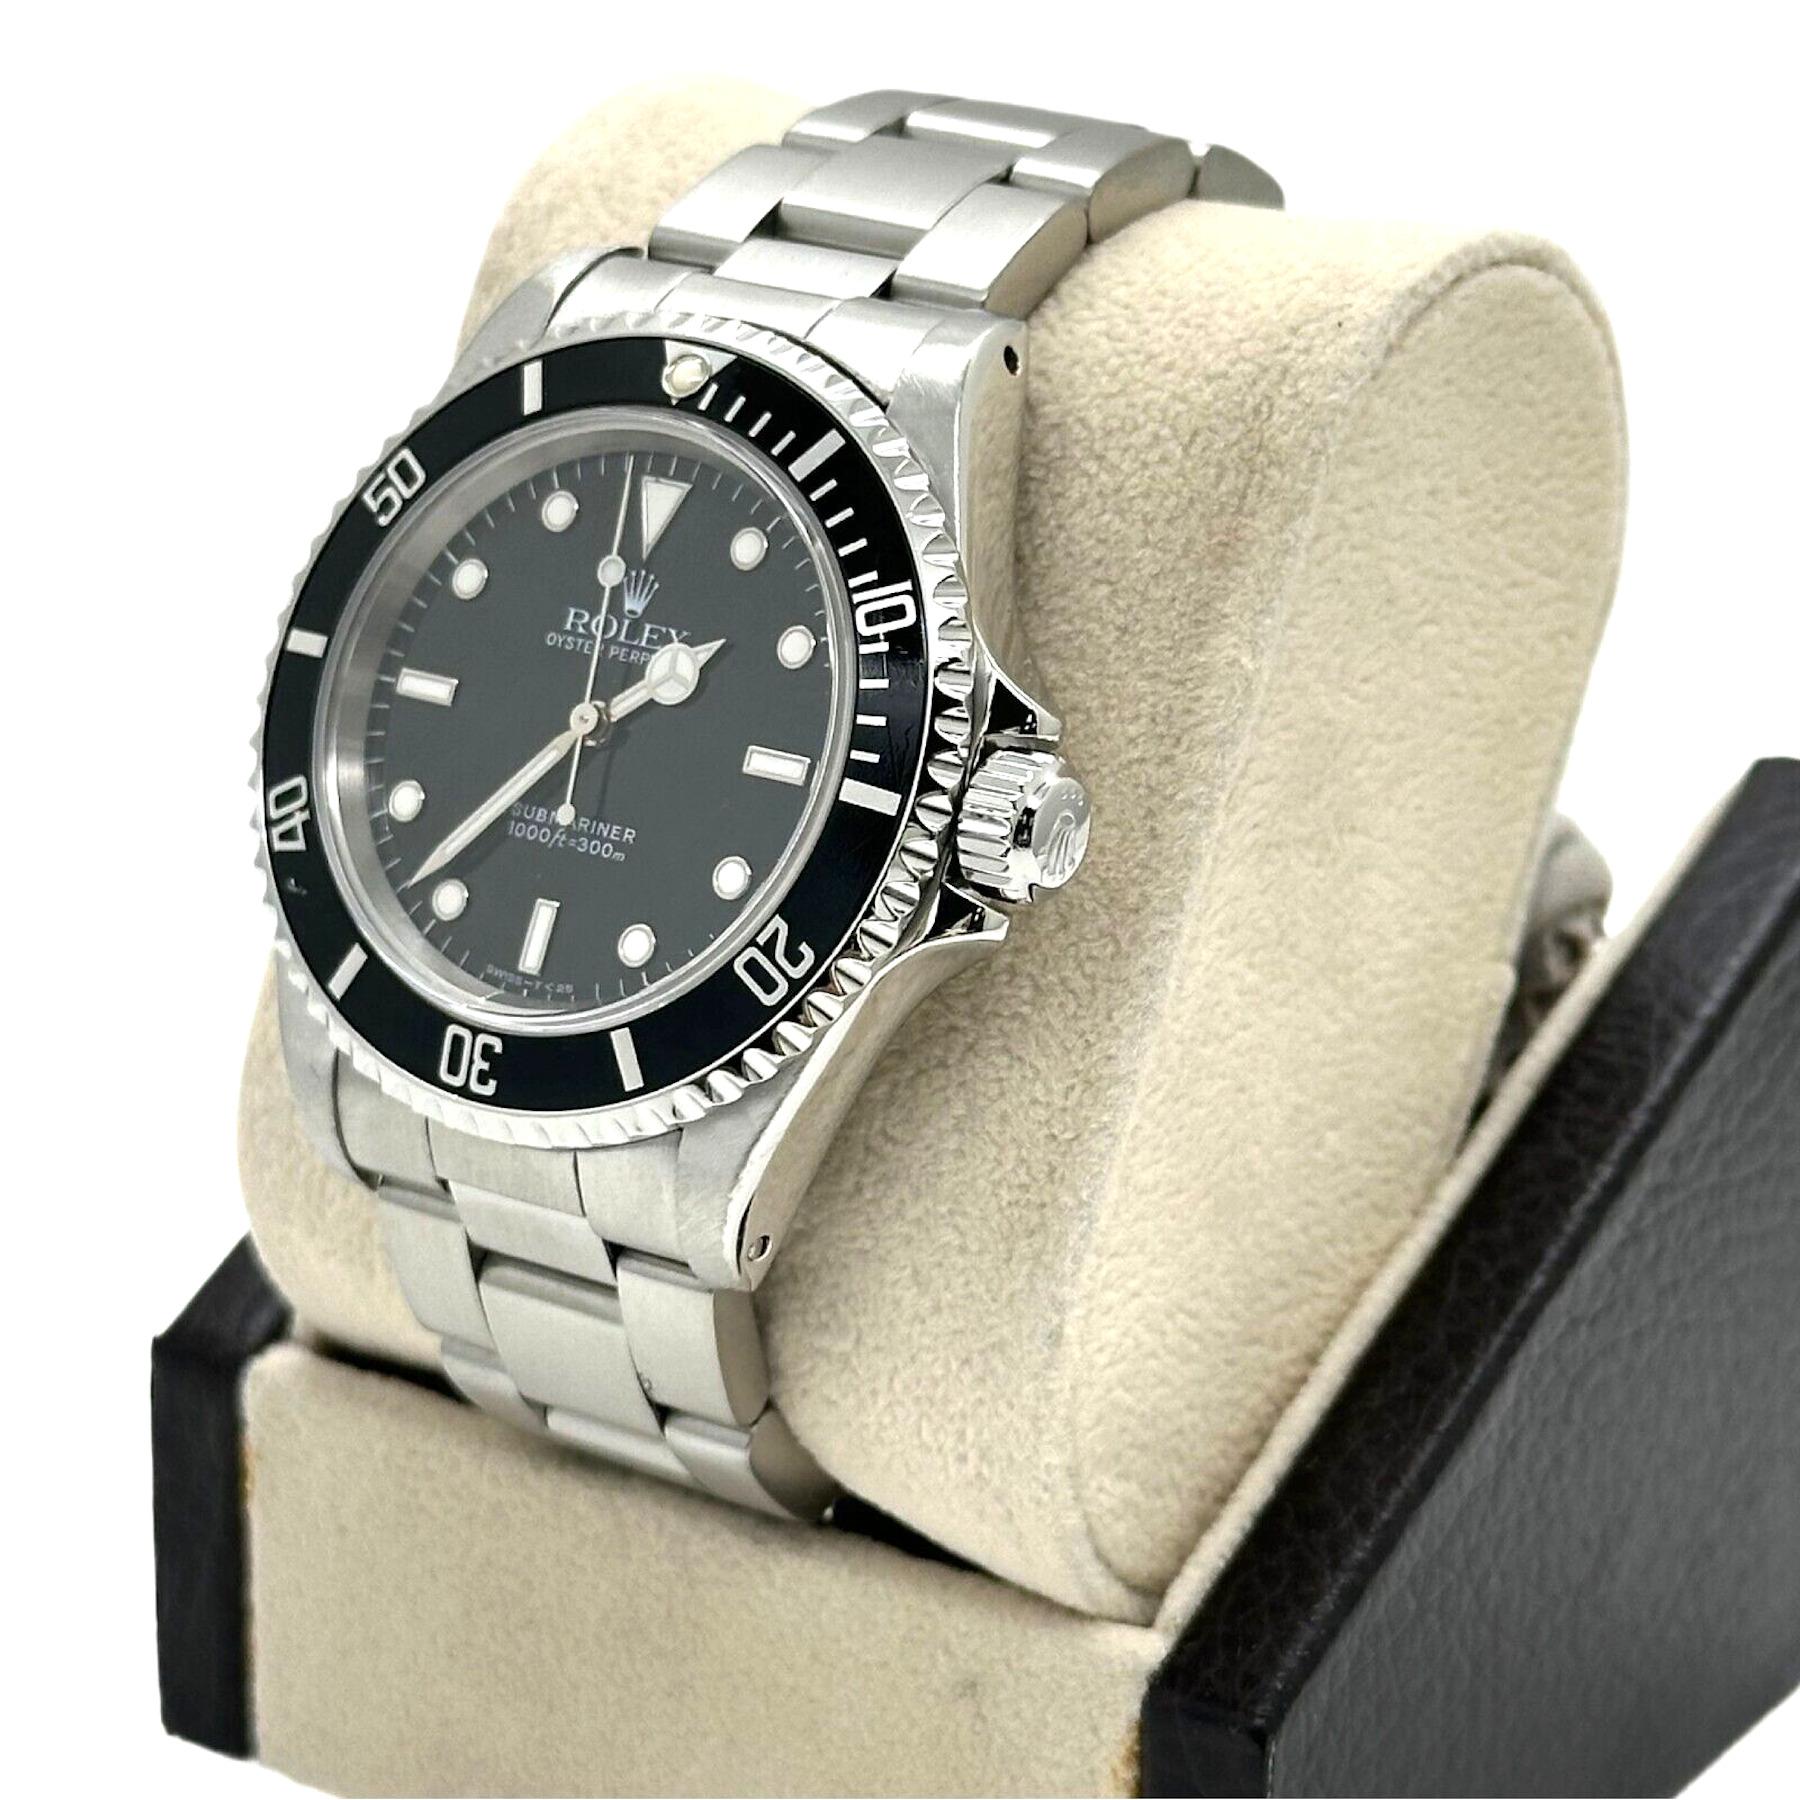 Rolex 14060 Submariner Black Dial Stainless Steel Box 1